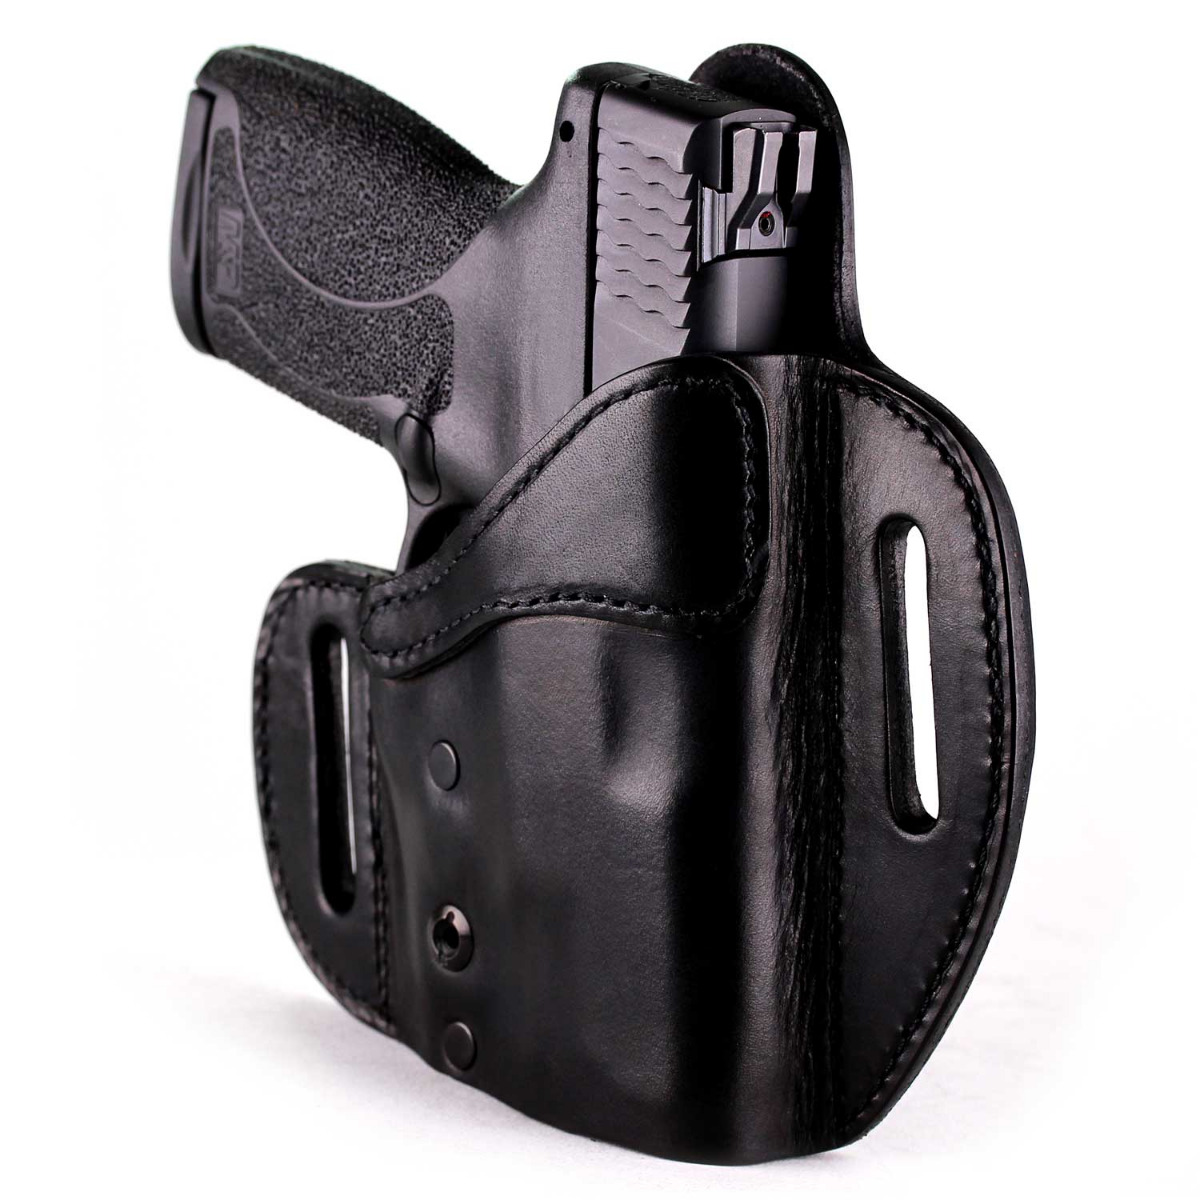 OWB Holster Paddle Fit Ruger Security 9mm Compact Pro Standard Without Red Laser 